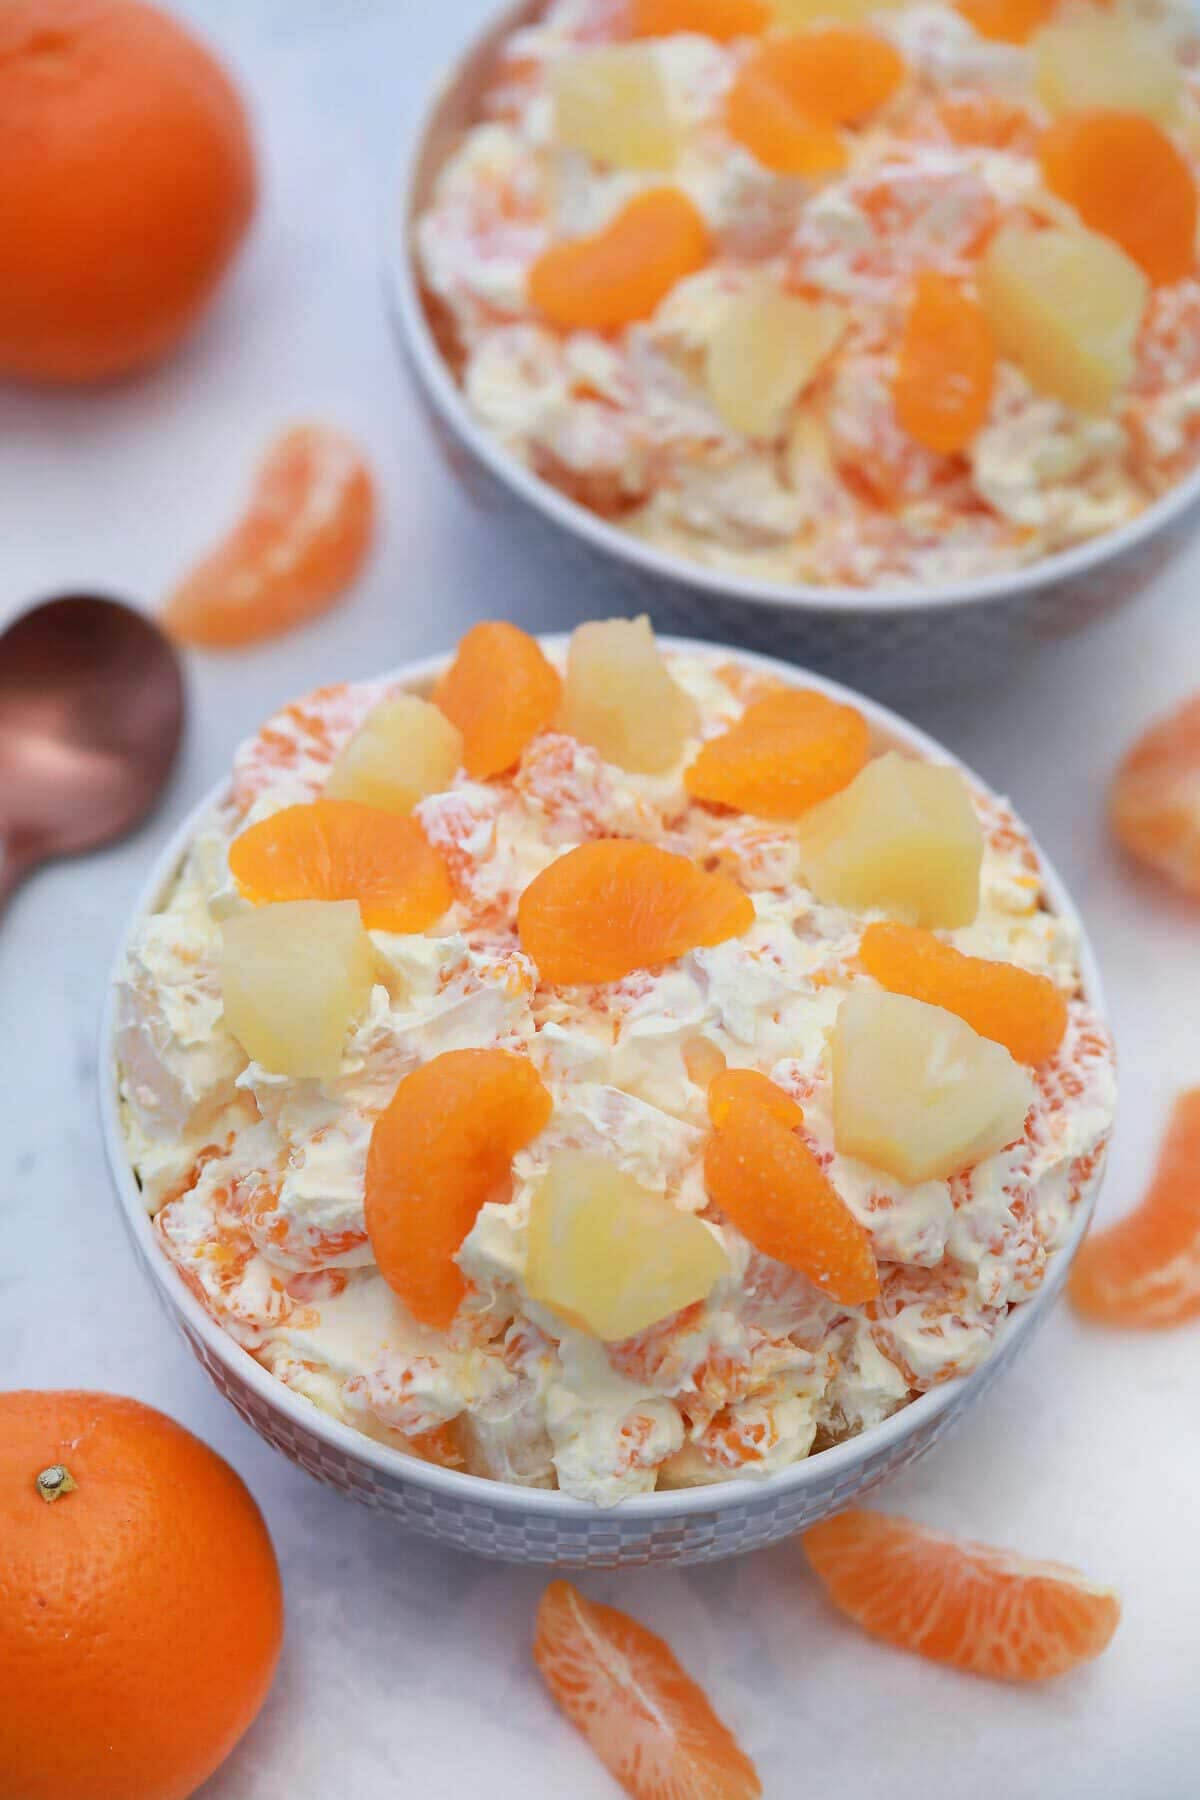 Two white bowls filled with orange cream salad topped with sliced orange and pineapples